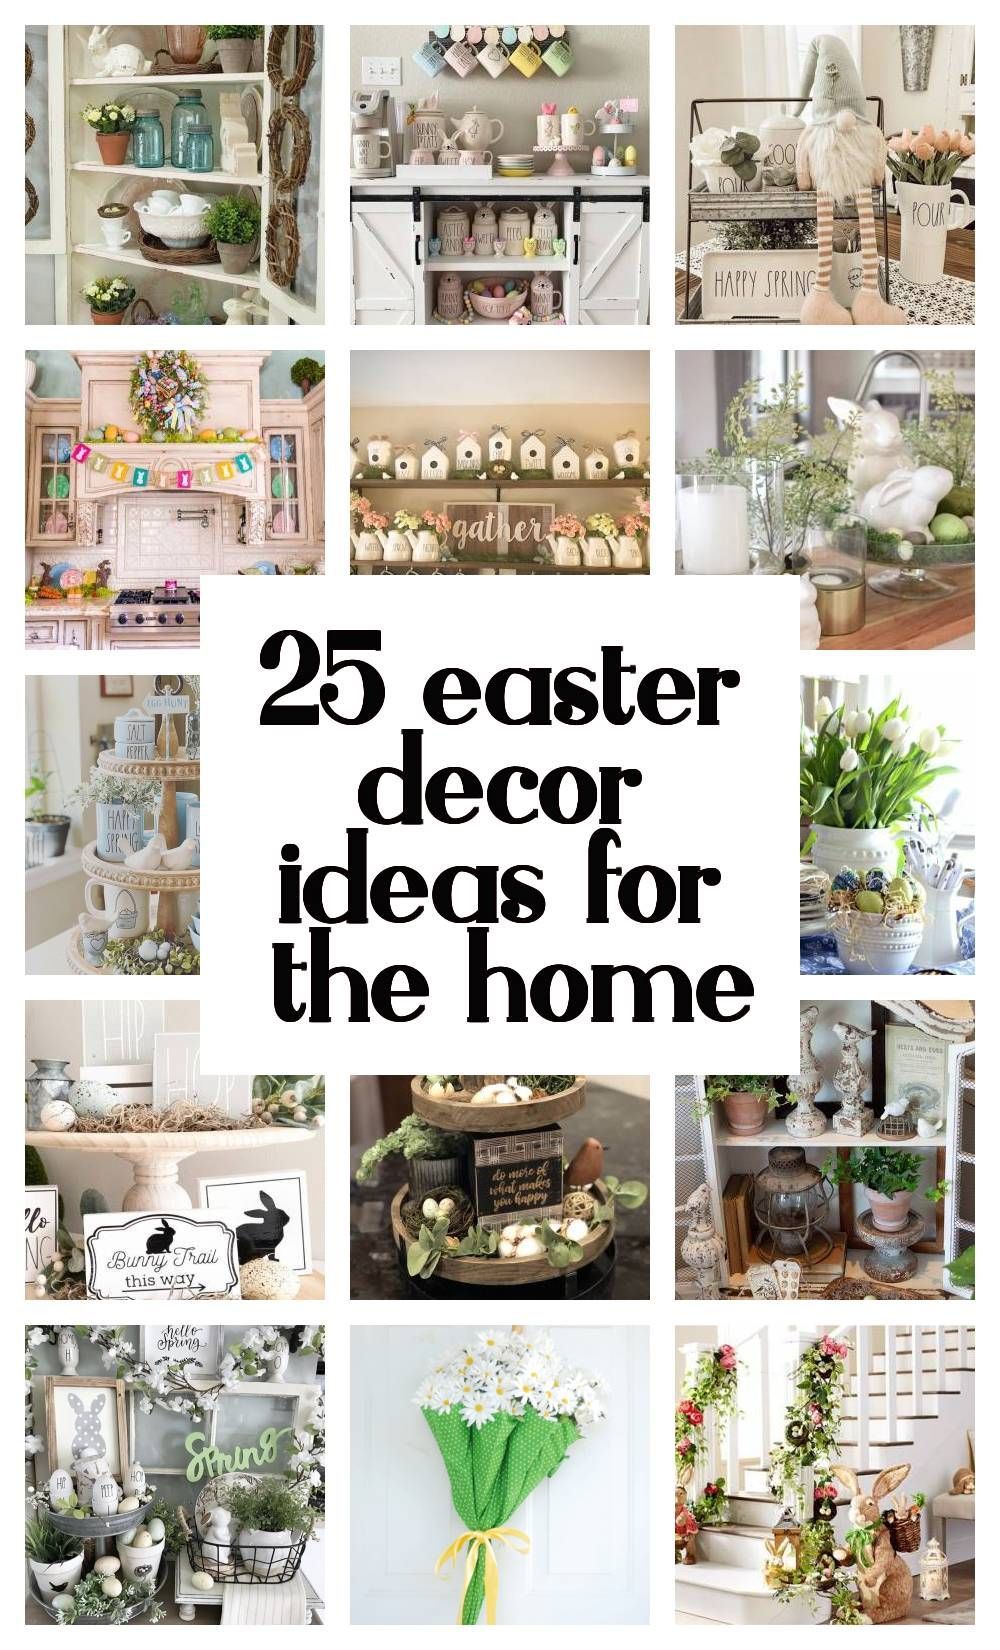 easter decor ideas for the home display